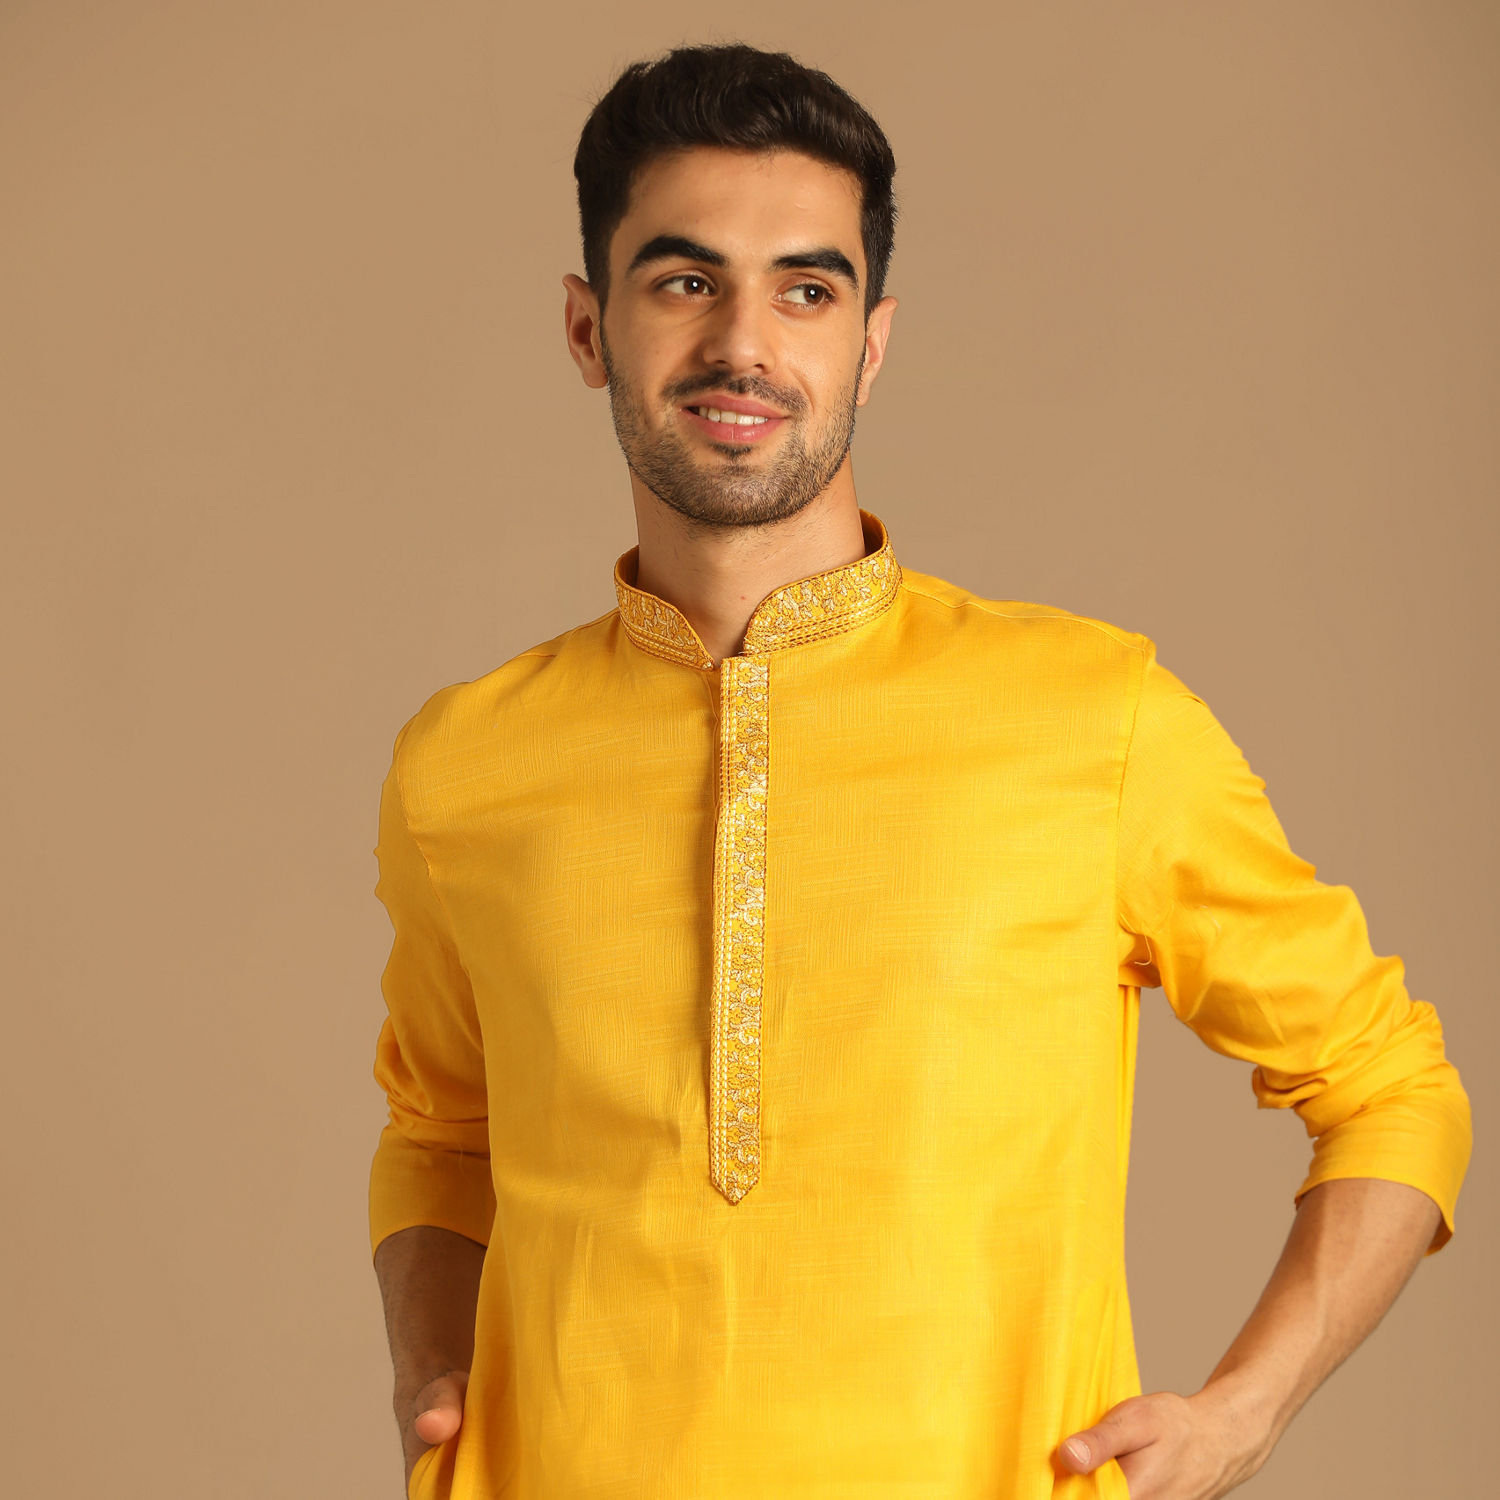 How can men dress up for the Haldi function? - Quora